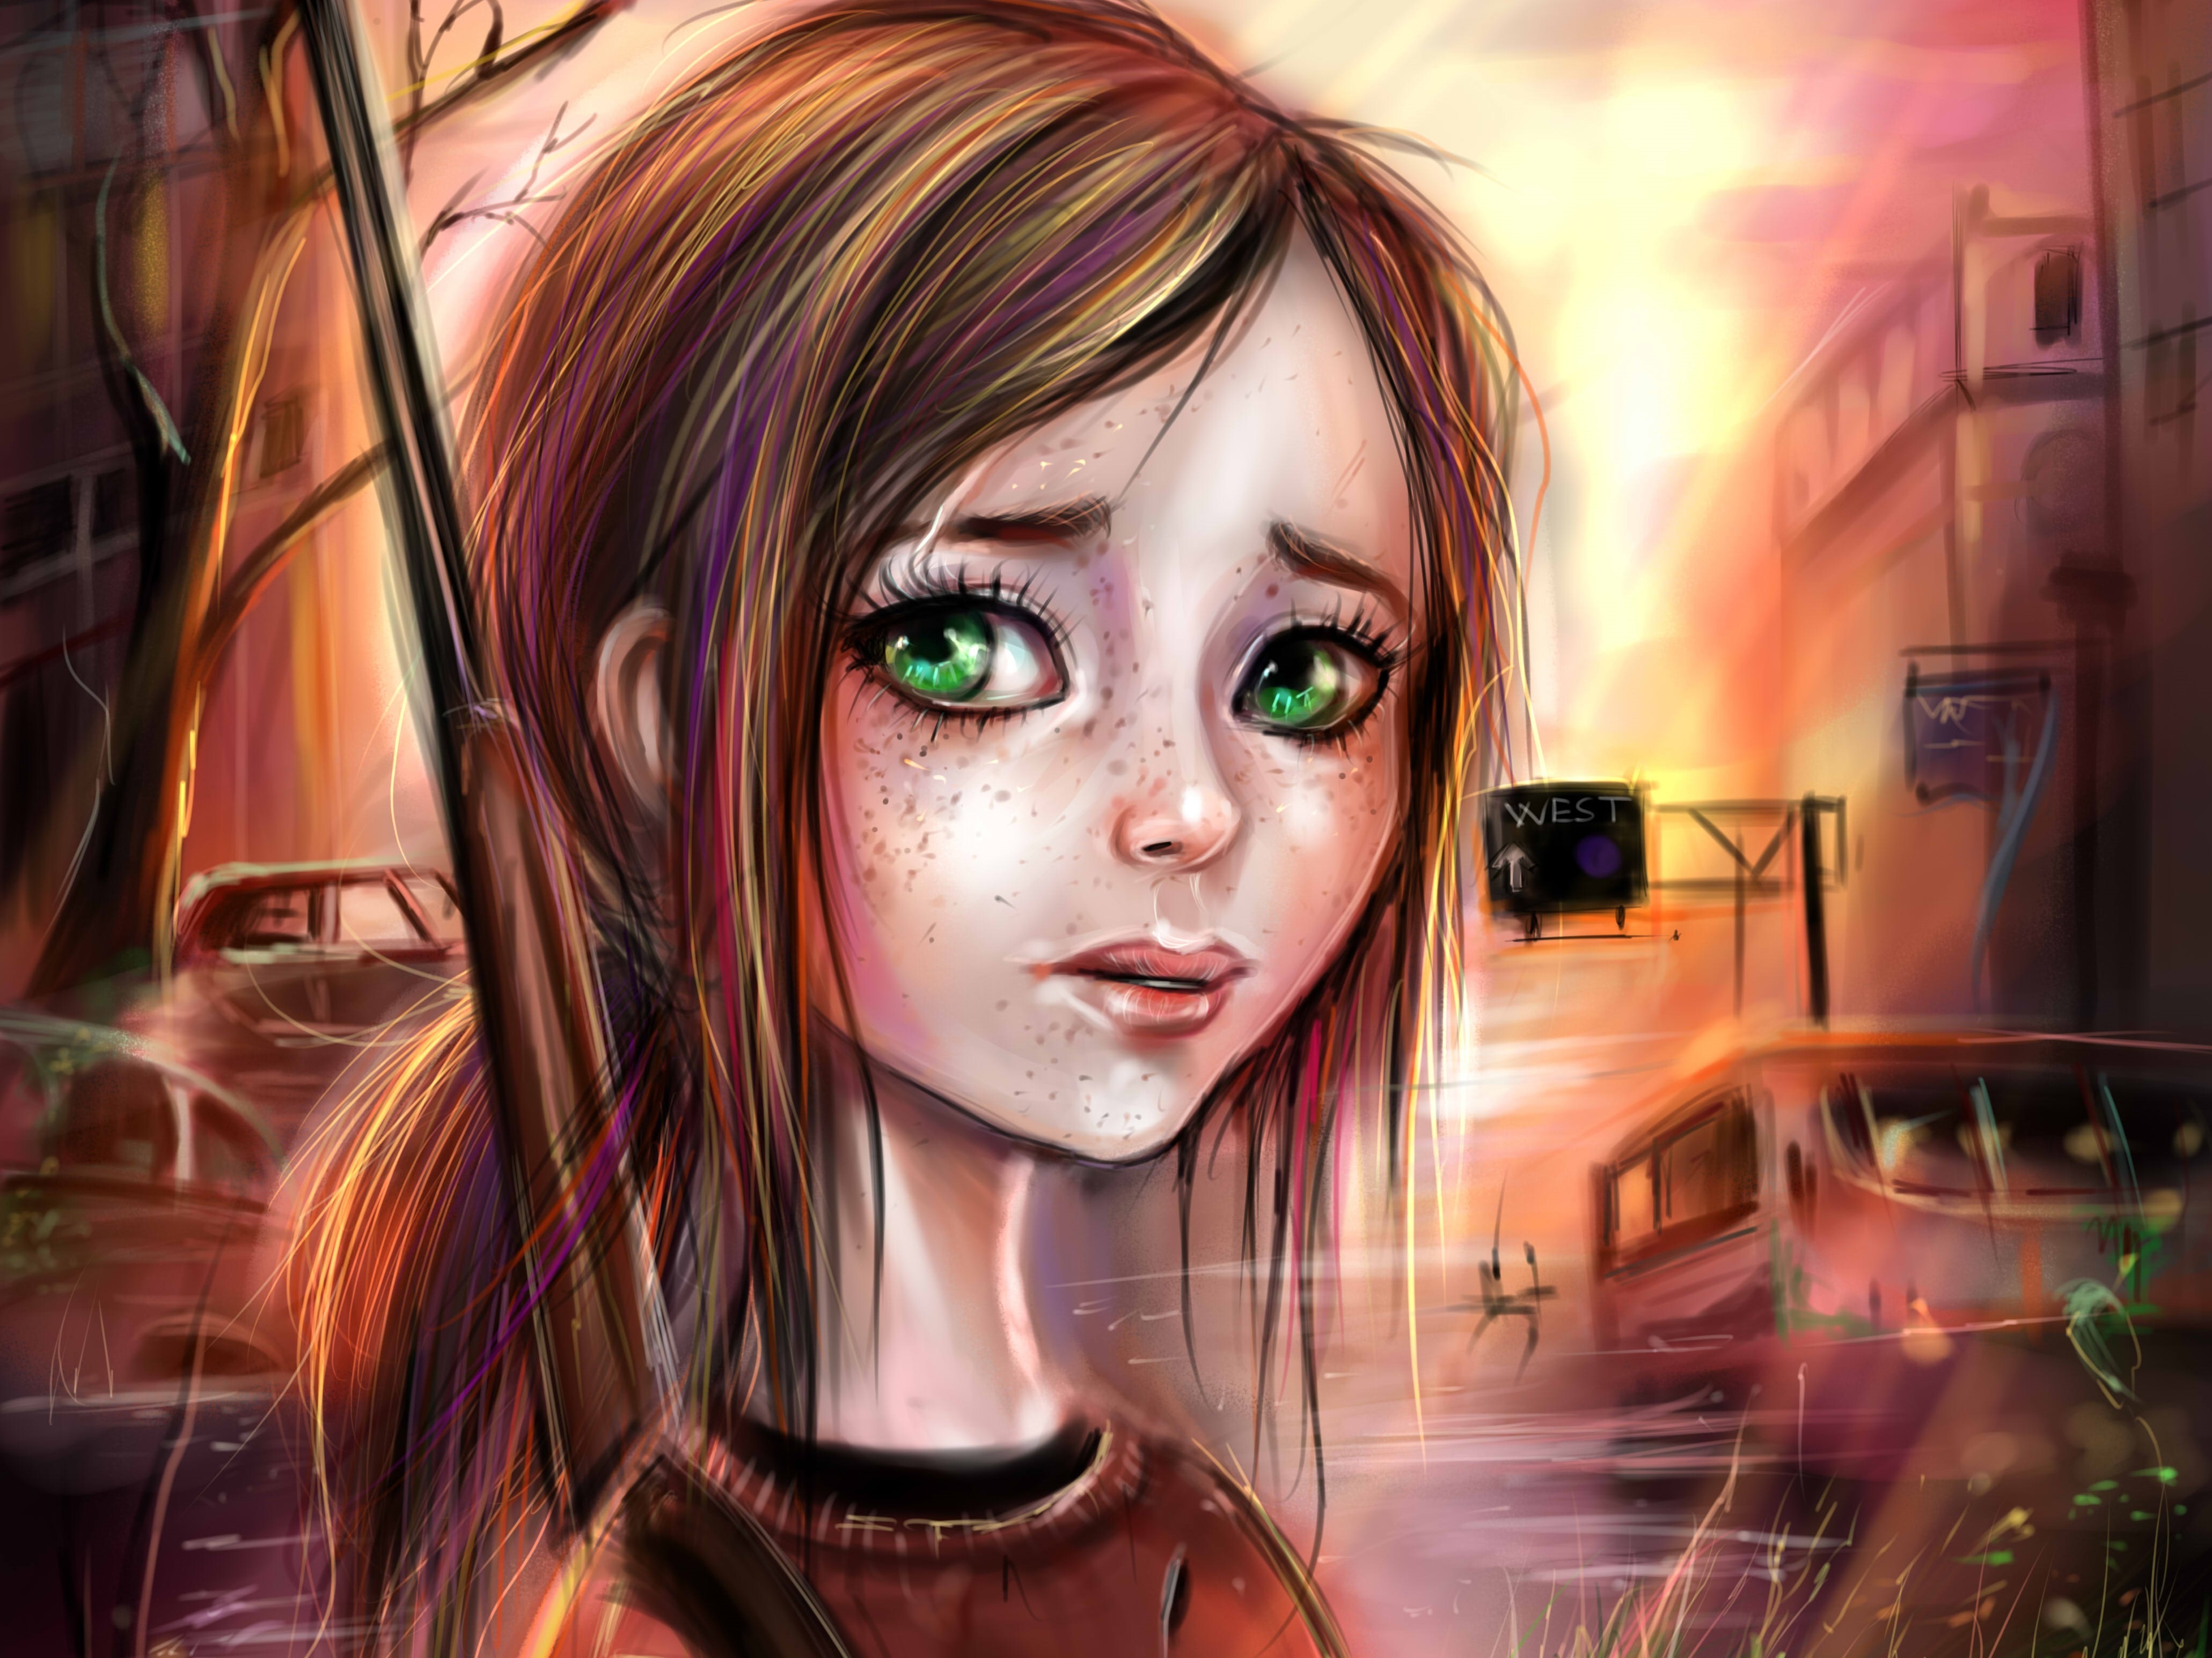 the, Last, Of, Us, Face, Glance, Little, Girls, Games, Girls, Apocalyptic, Sci fi Wallpaper